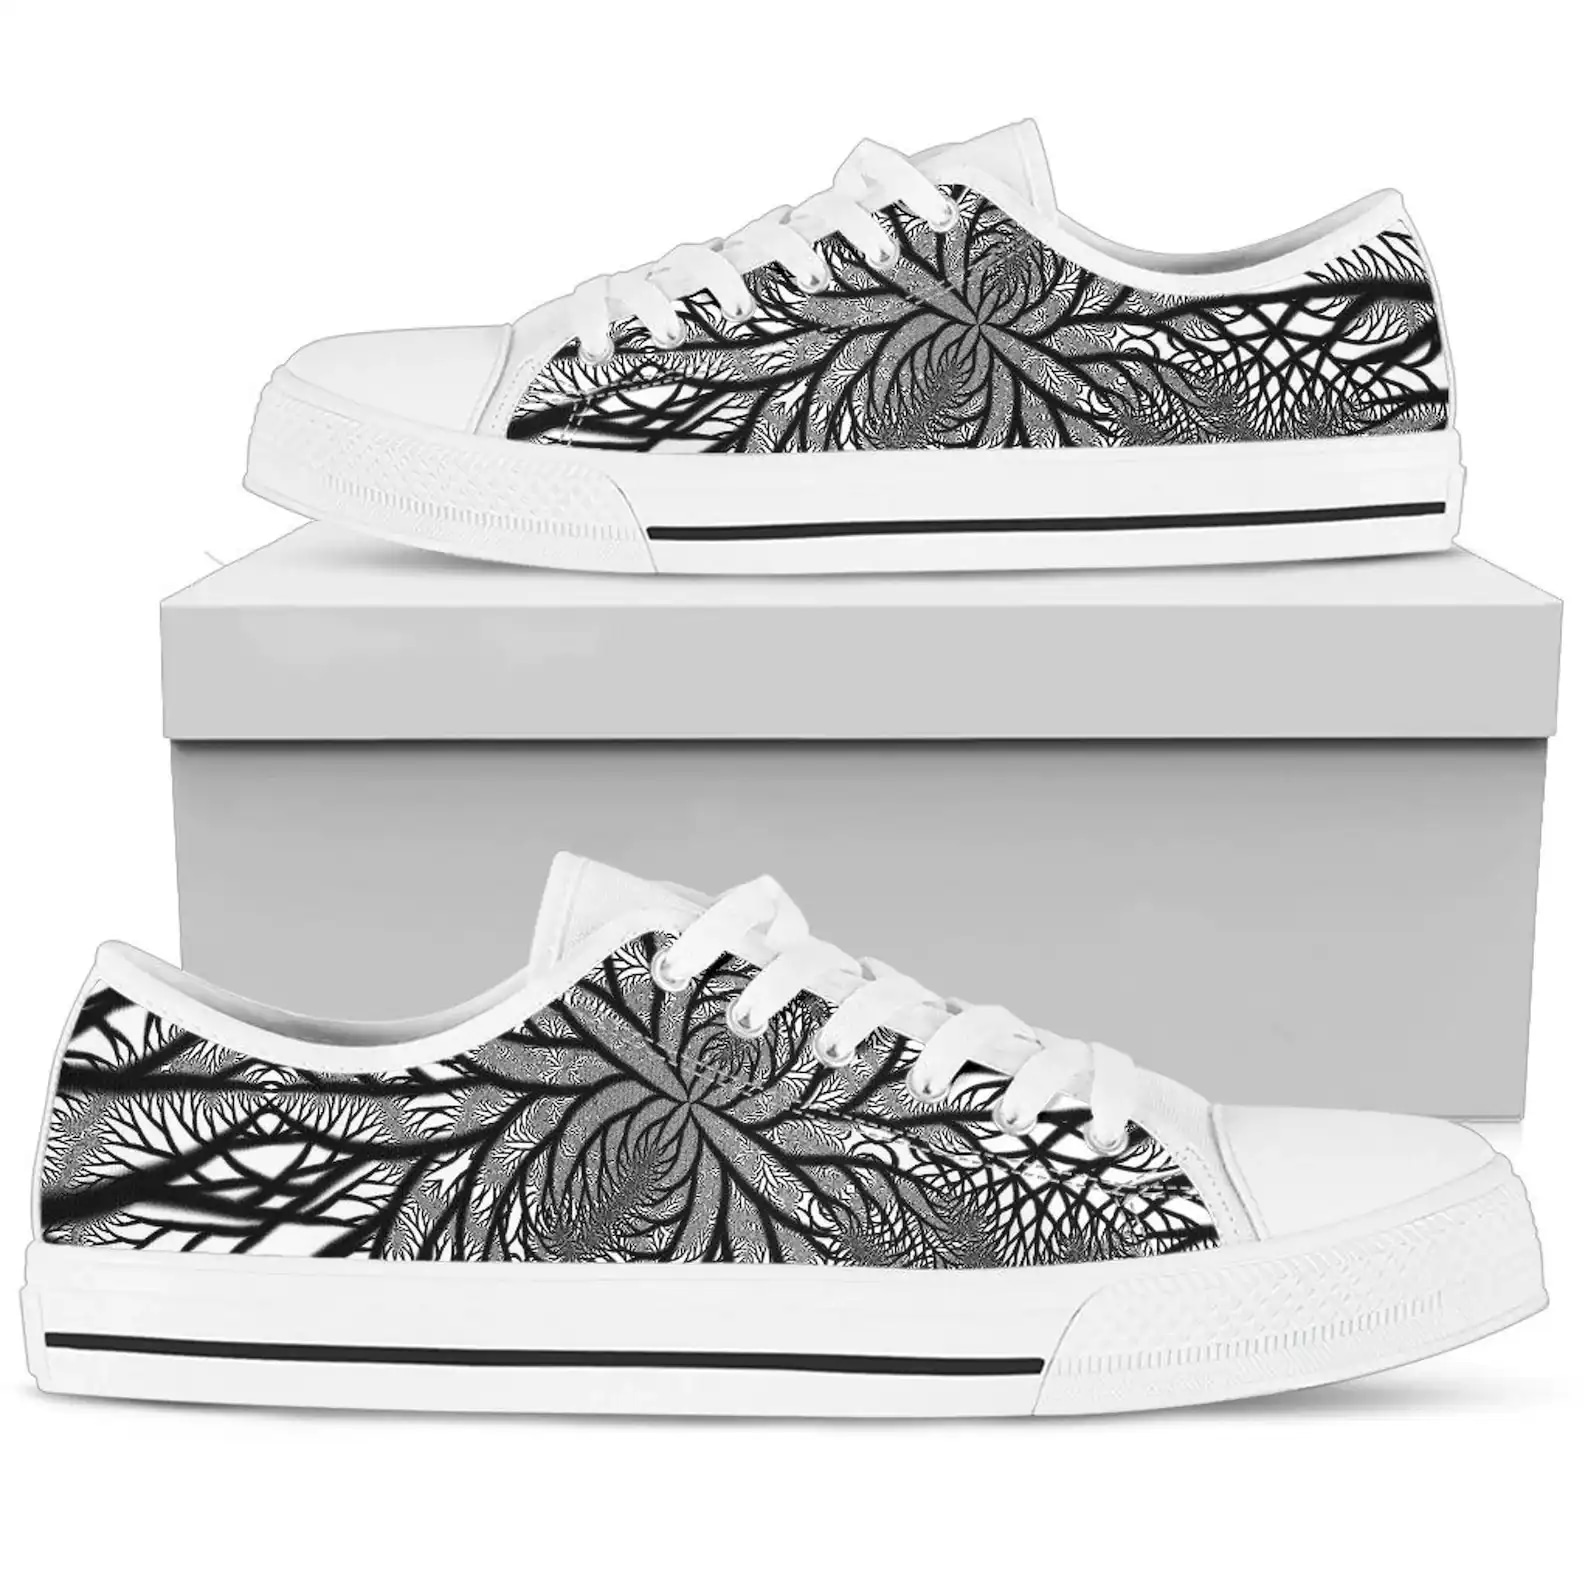 Visionary Art Wild One Black And White Low Top Sneakers